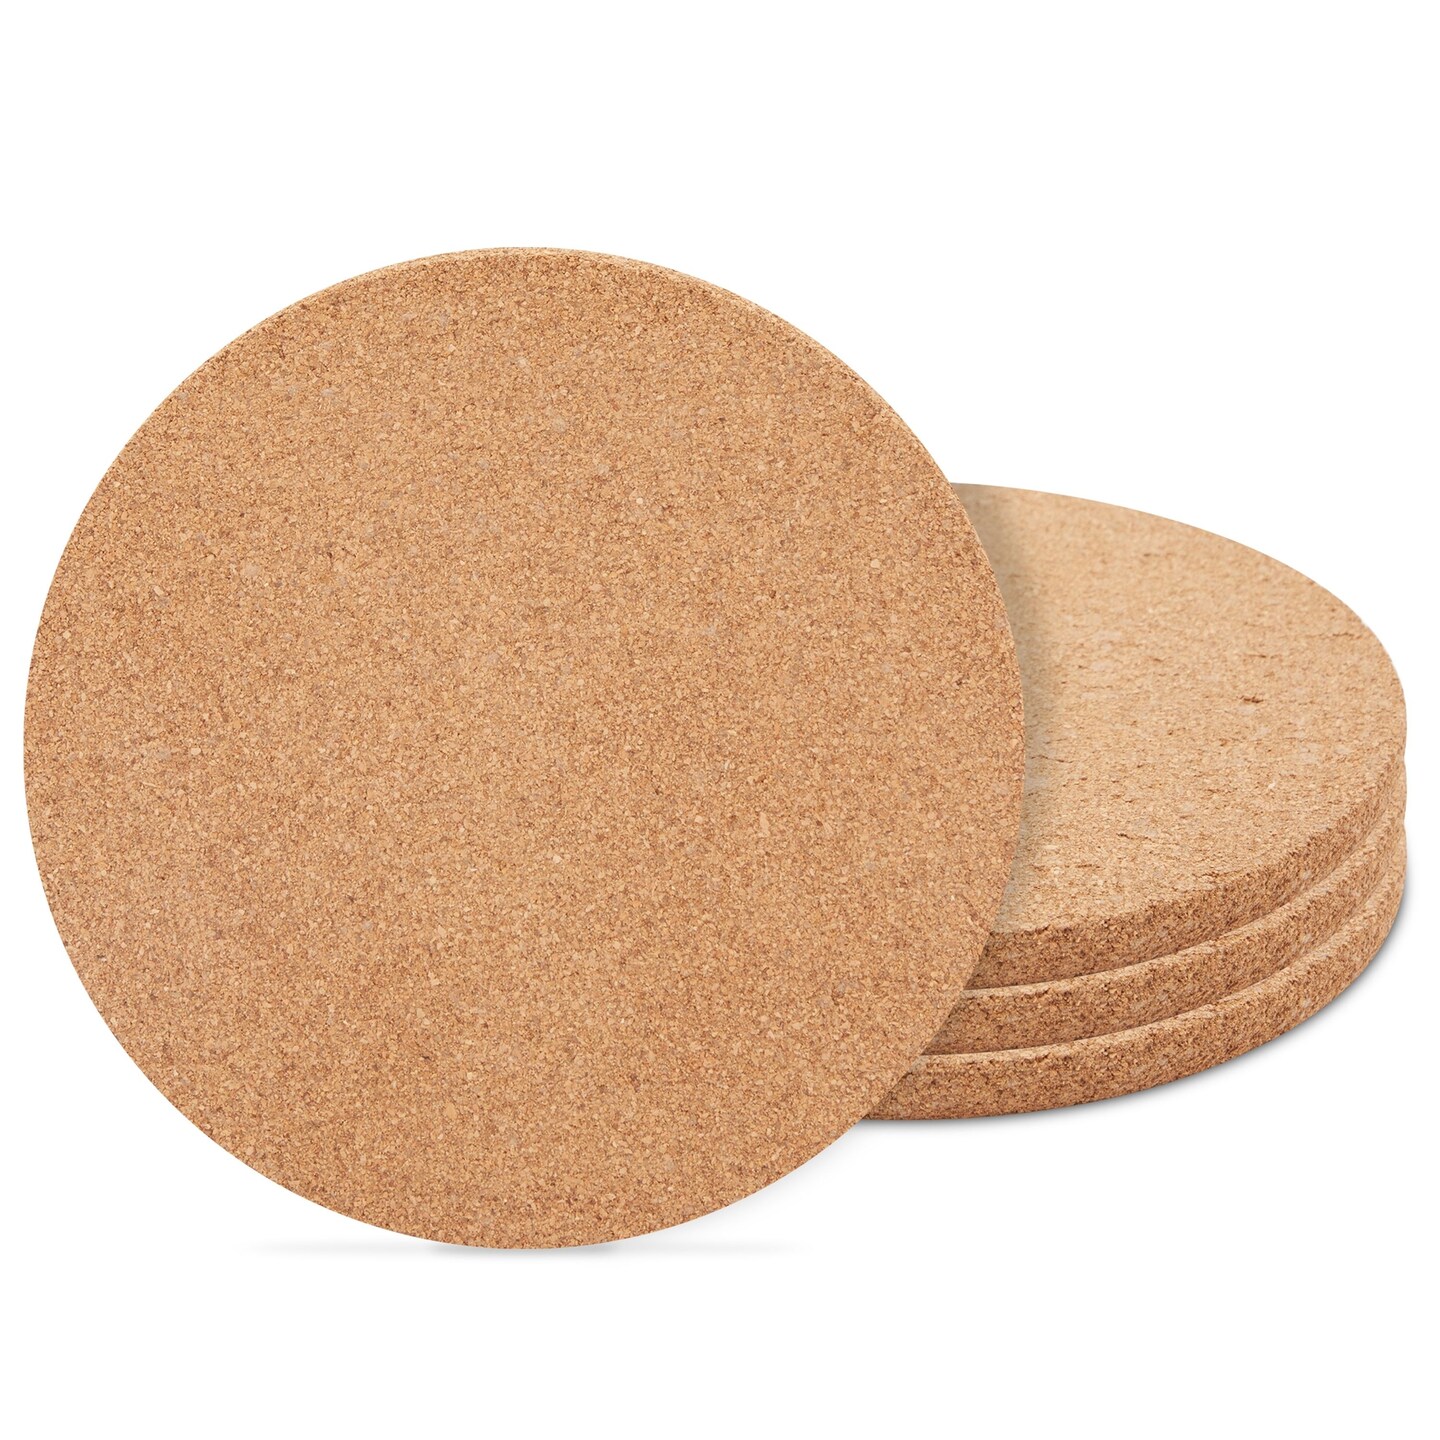 4 Pack Round Cork Trivets for Hot Dishes, Plates, and Kitchen Countertops, Corkboard Pads for Hot Pots, Pans, Plates, Planters, Glassware, and DIY Crafts (9 In)